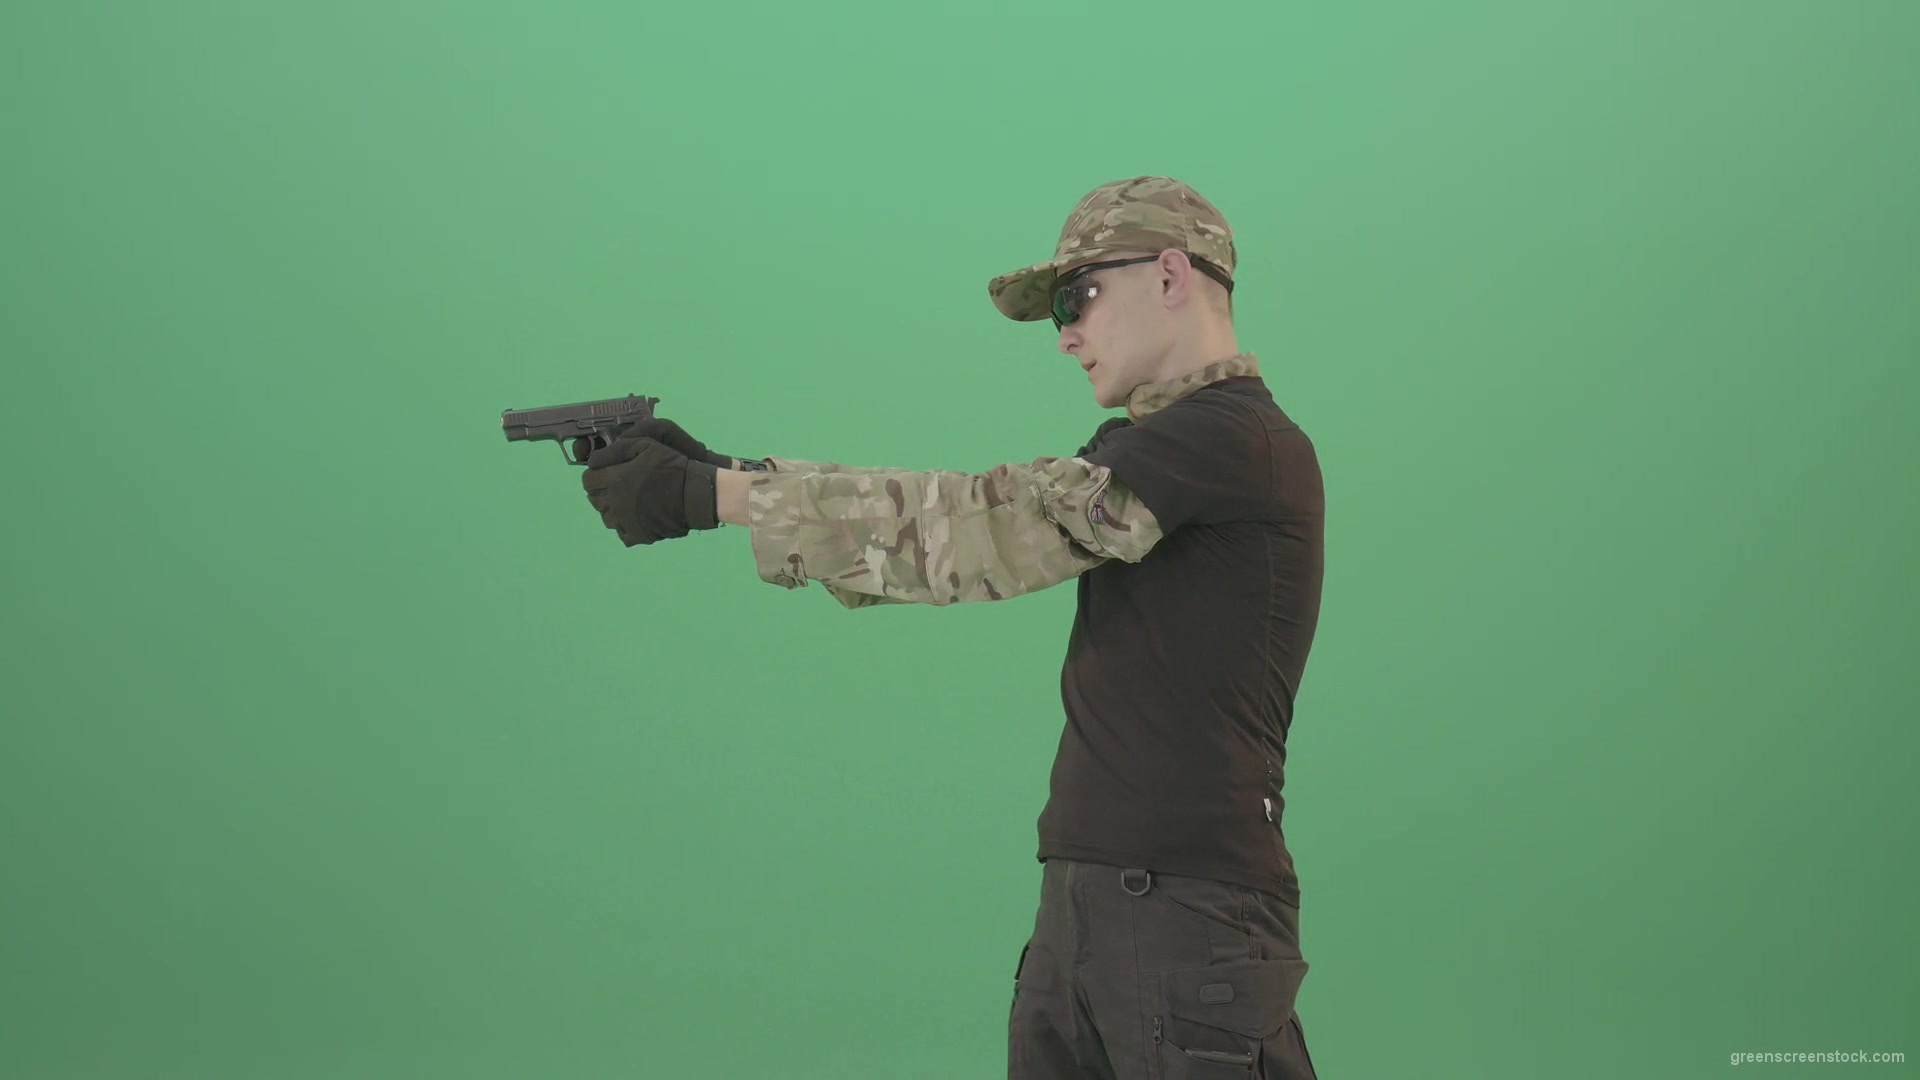 Army-Man-Assassin-shooting-with-small-gun-isolated-on-green-screen-4K-Video-Footage-1920_004 Green Screen Stock